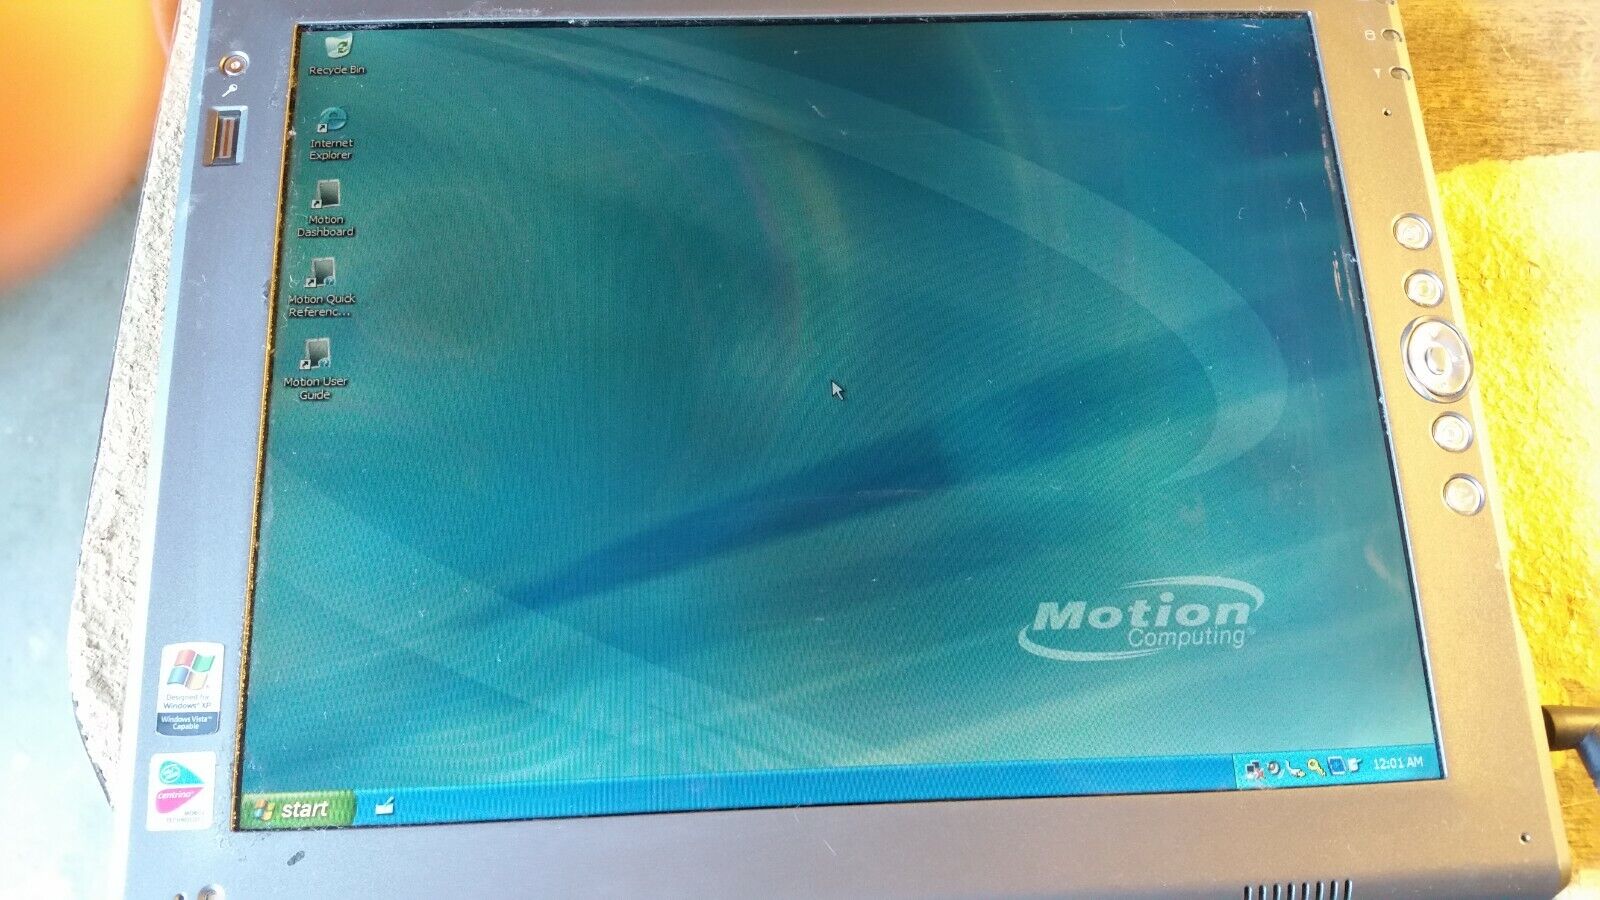  Motion Computing LE1600 1.5GHZ Tablet  512MB RAM  30GB HD 12.1" Tablet 